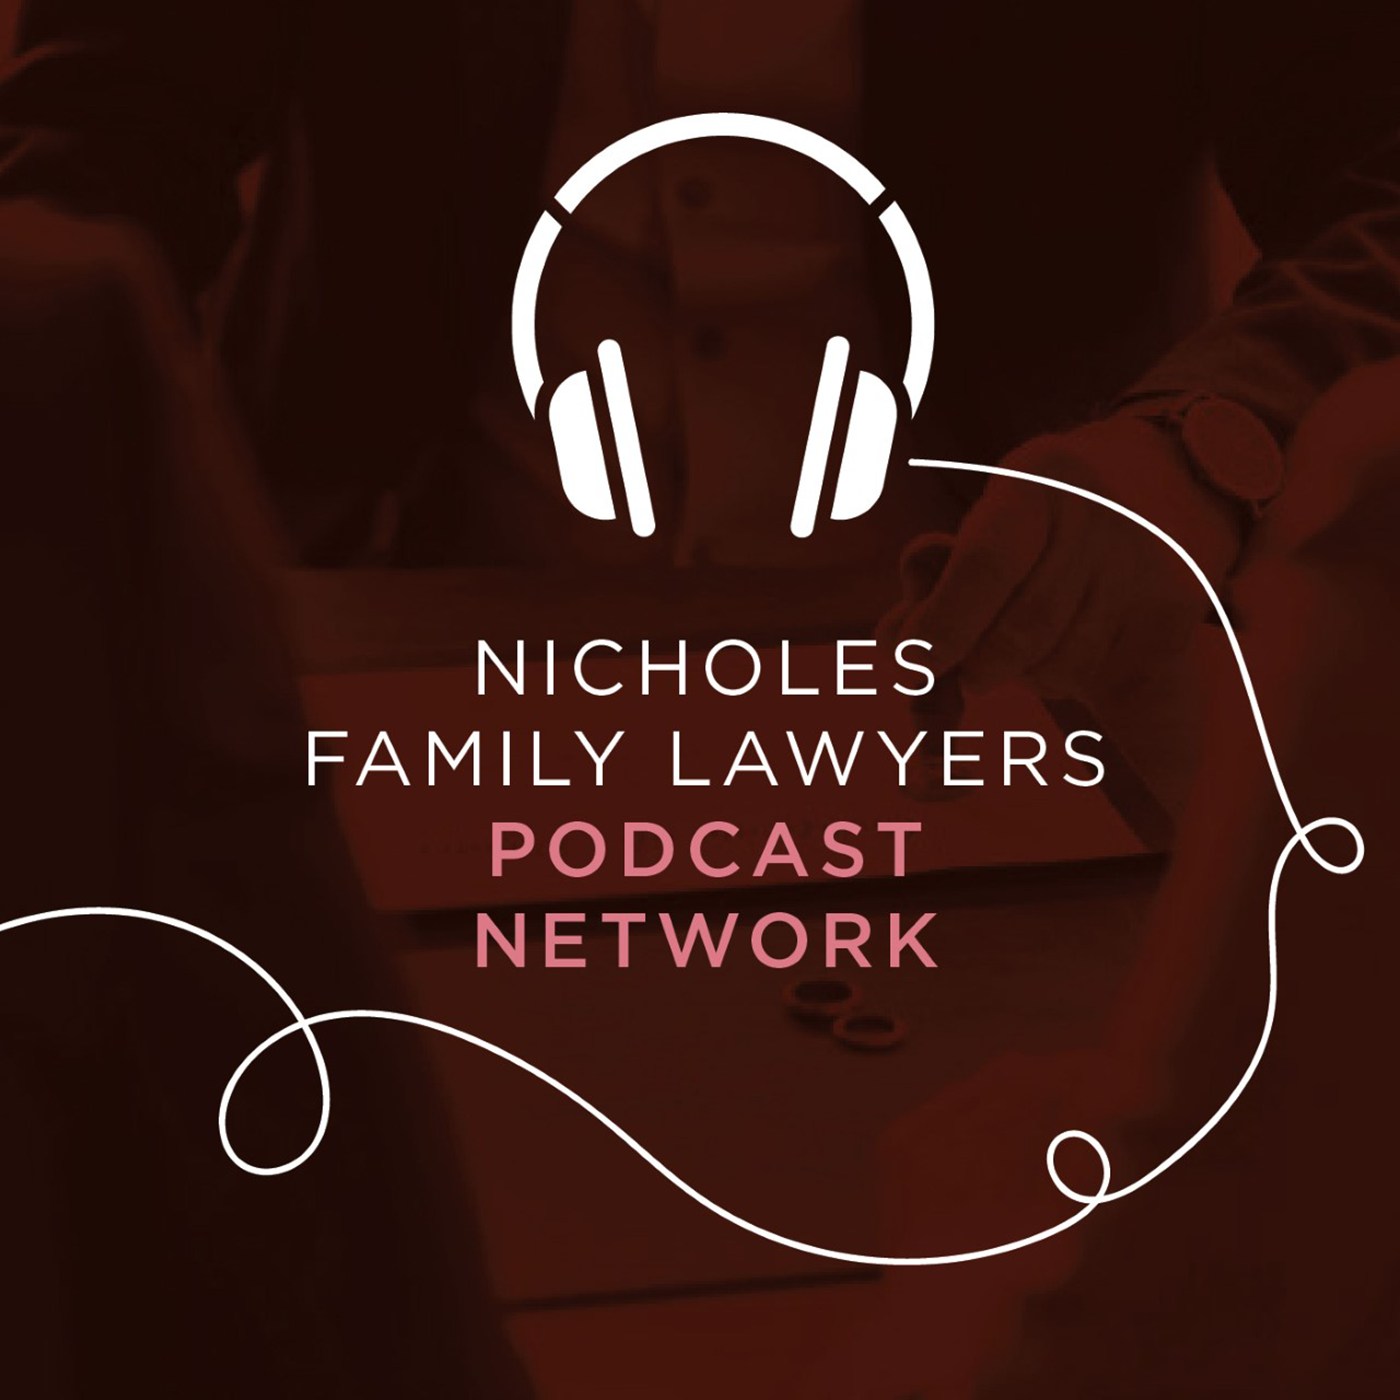 Nicholes Family Lawyers Podcast